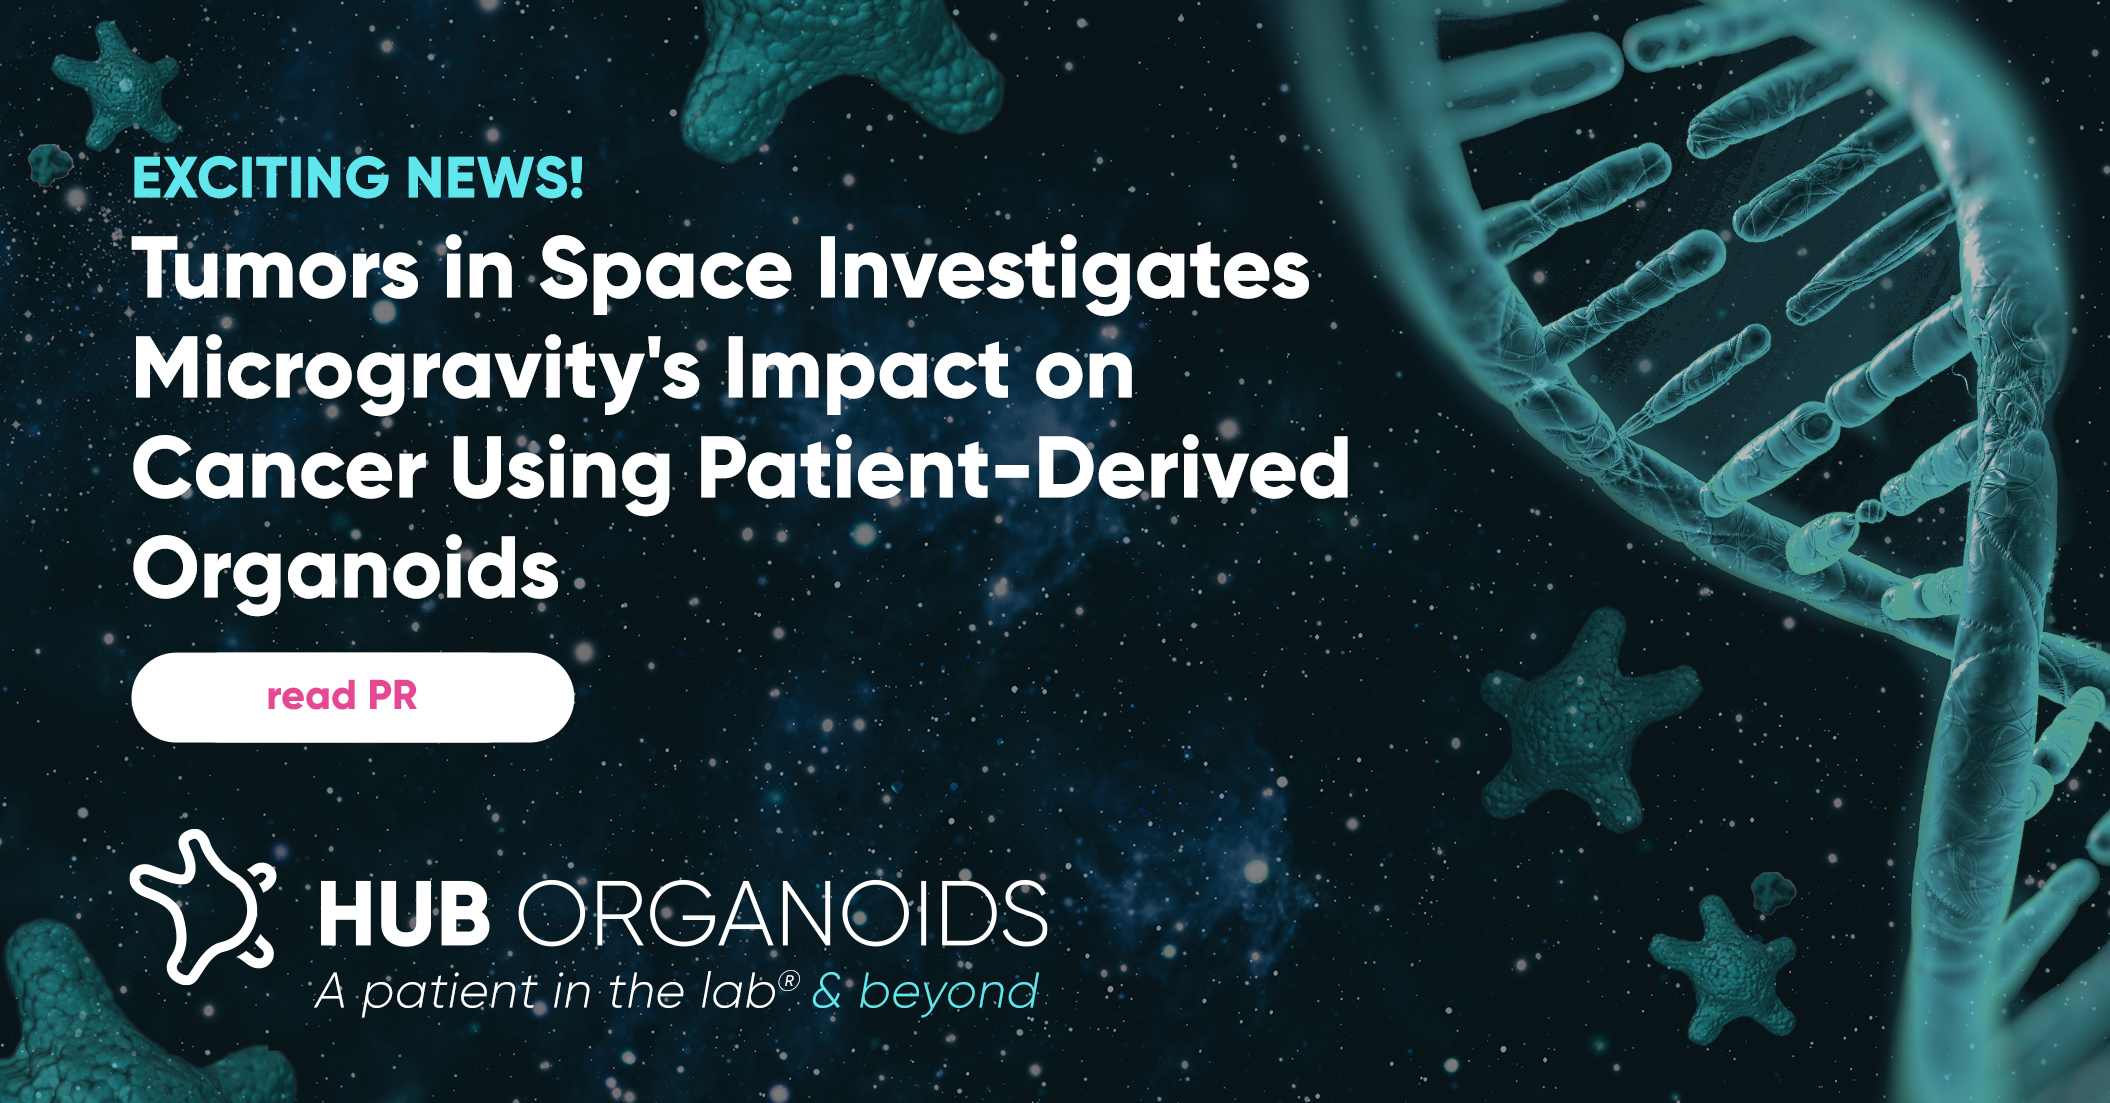 Tumors in Space Investigates Microgravity’s Impact on Cancer Using Patient-Derived HUB Organoids